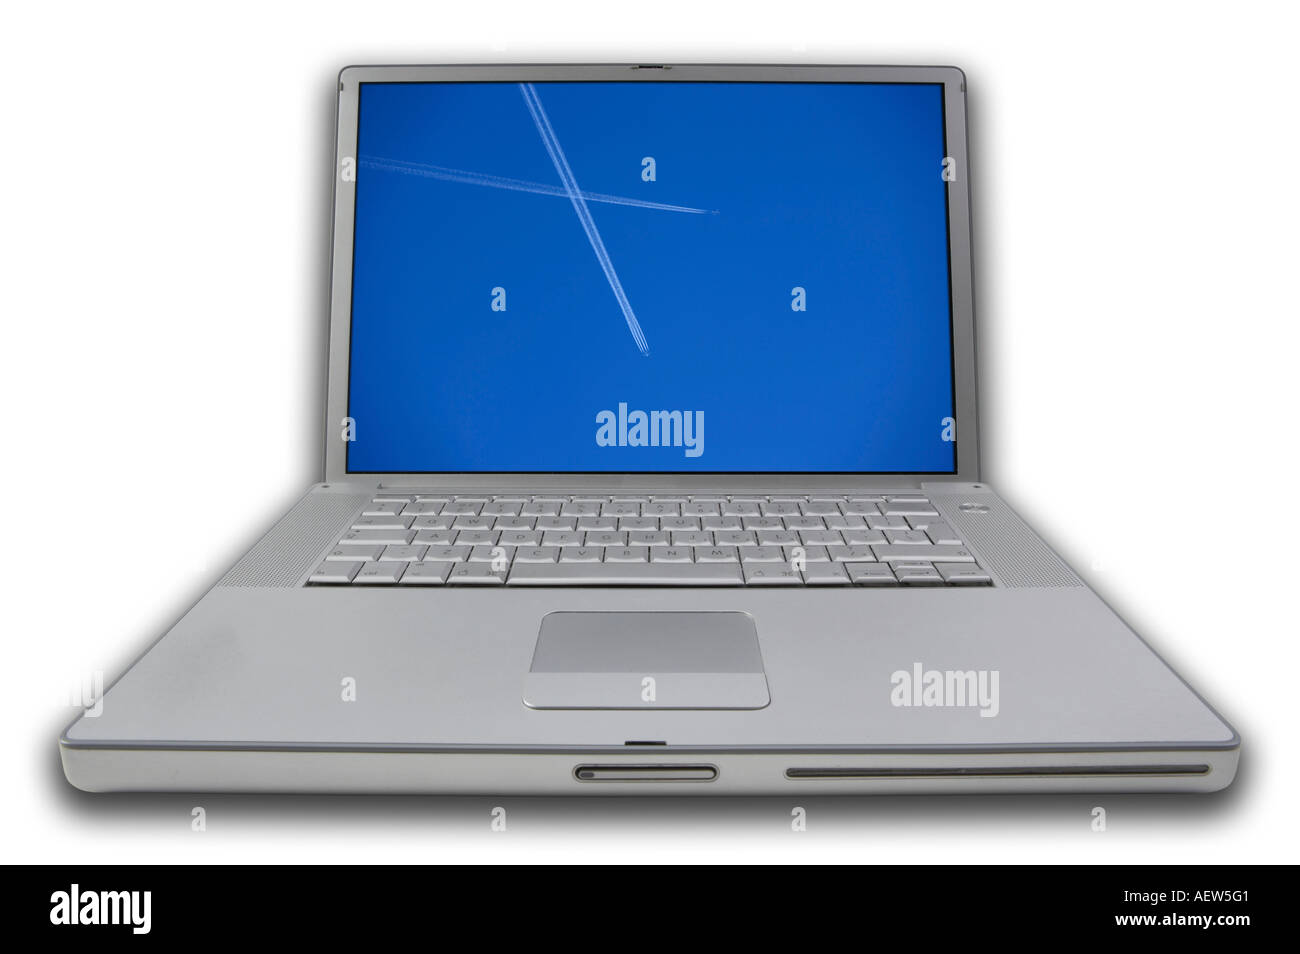 LAP TOP NOTE BOOK PERSONAL COMPUTER DISPLAYING PICTURE OF JET AIRLINER IN BLUE SKY ON SCREEN Stock Photo